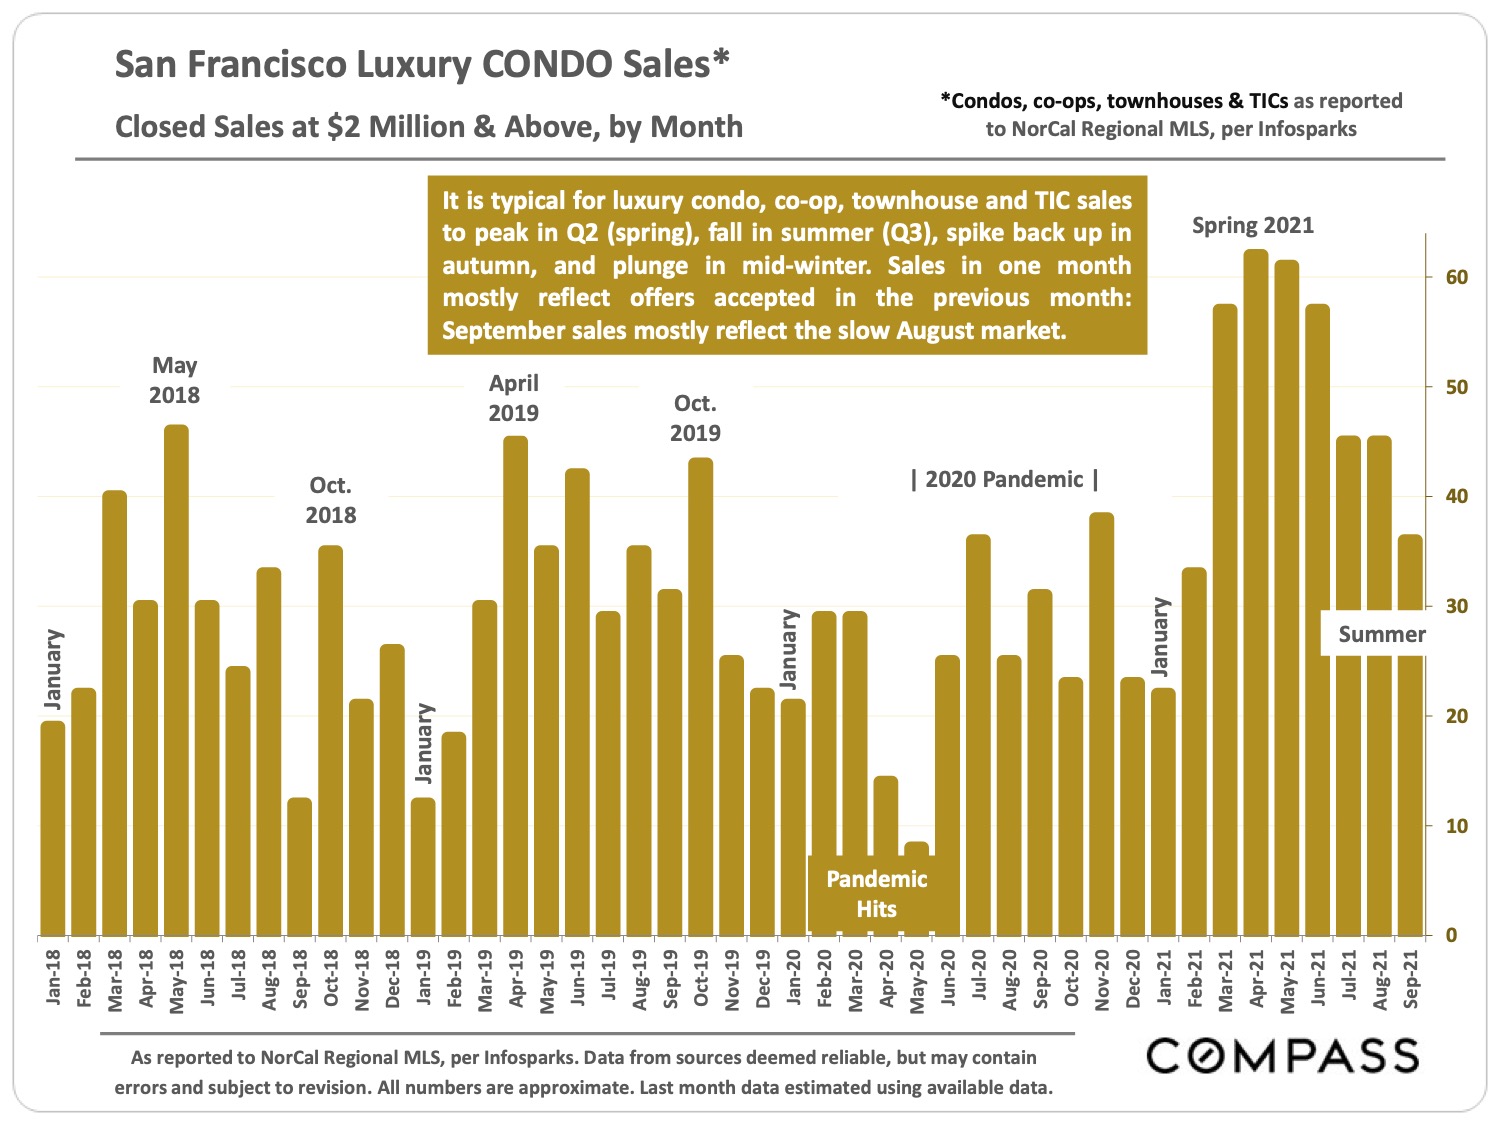 San Francisco Luxury Condo Sales - Closed Sales at $2 Million and Above, by Month